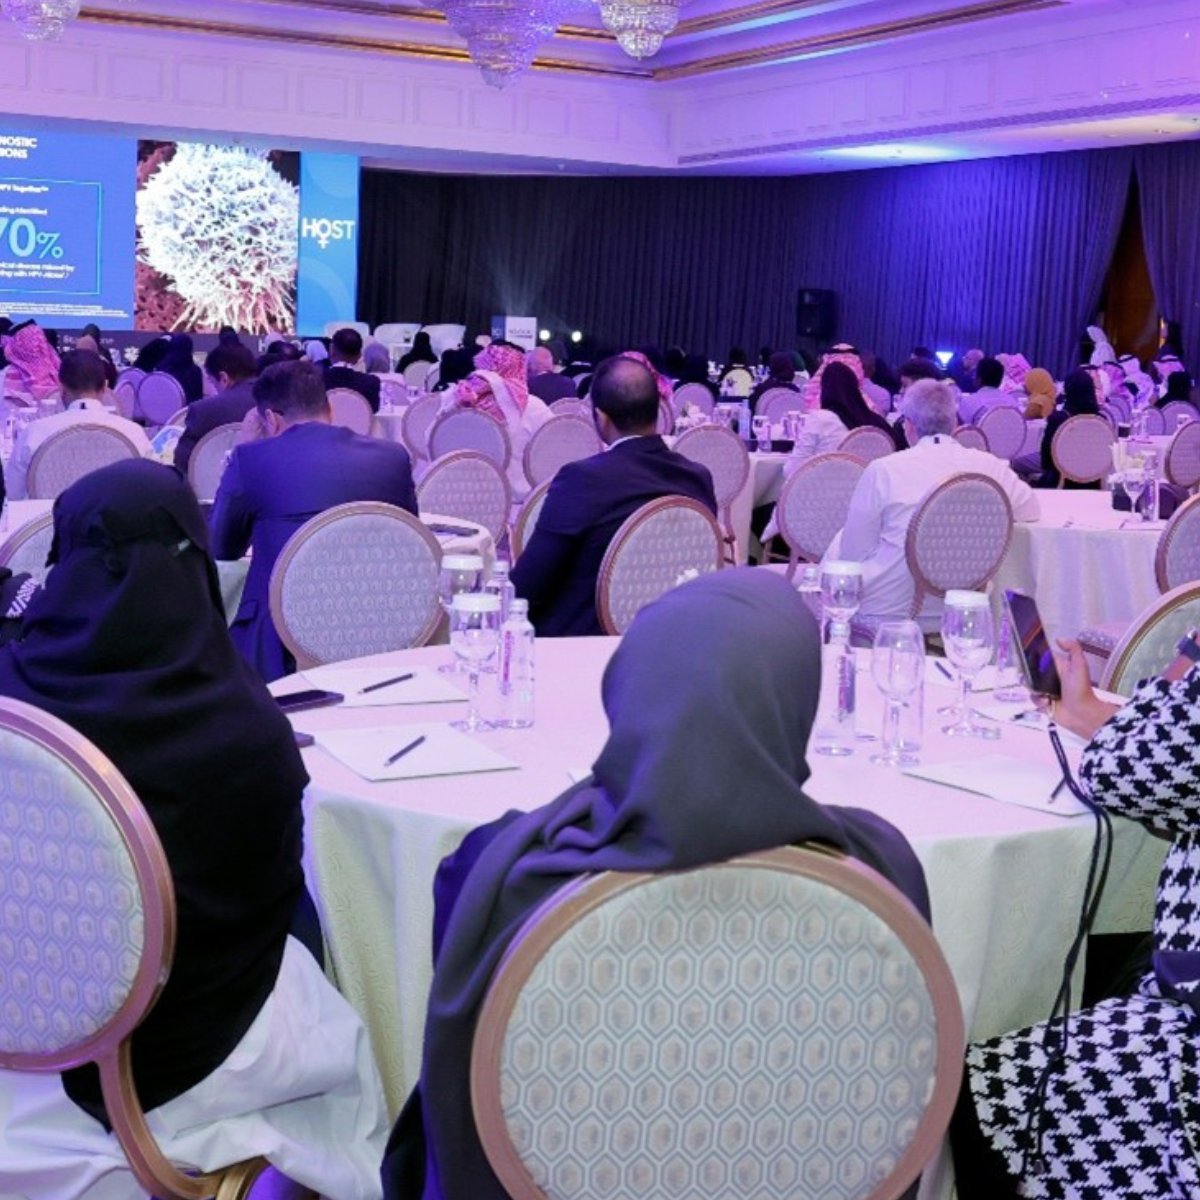 We were delighted to welcome healthcare professionals in Saudi Arabia and the UAE to our HOST meetings. We shared best practice, the Year 3 #GlobalWomensHealthIndex data and reimagined a gold standard of healthcare. We look forward to working together to improve #womenshealth.